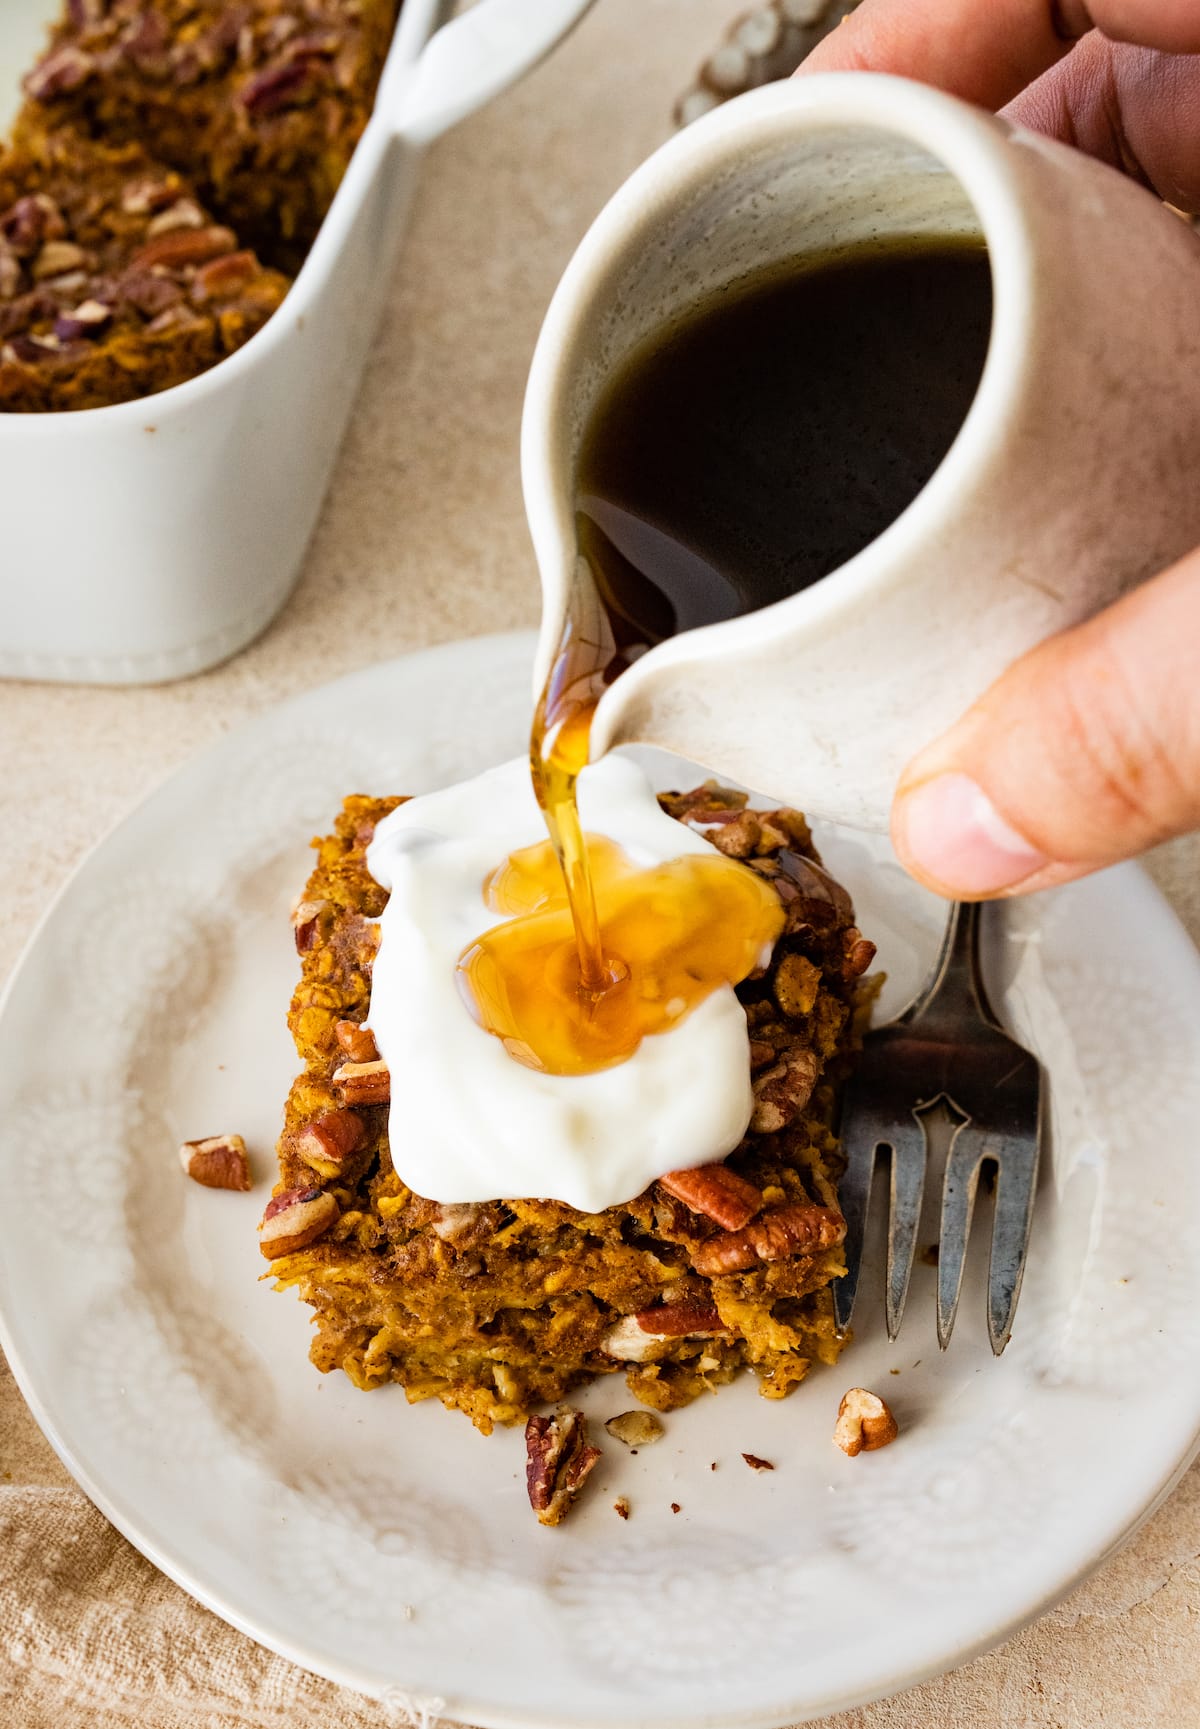 Maple syrup being poured over a slice of pumpkin baked oatmeal that is topped with whipped cream.